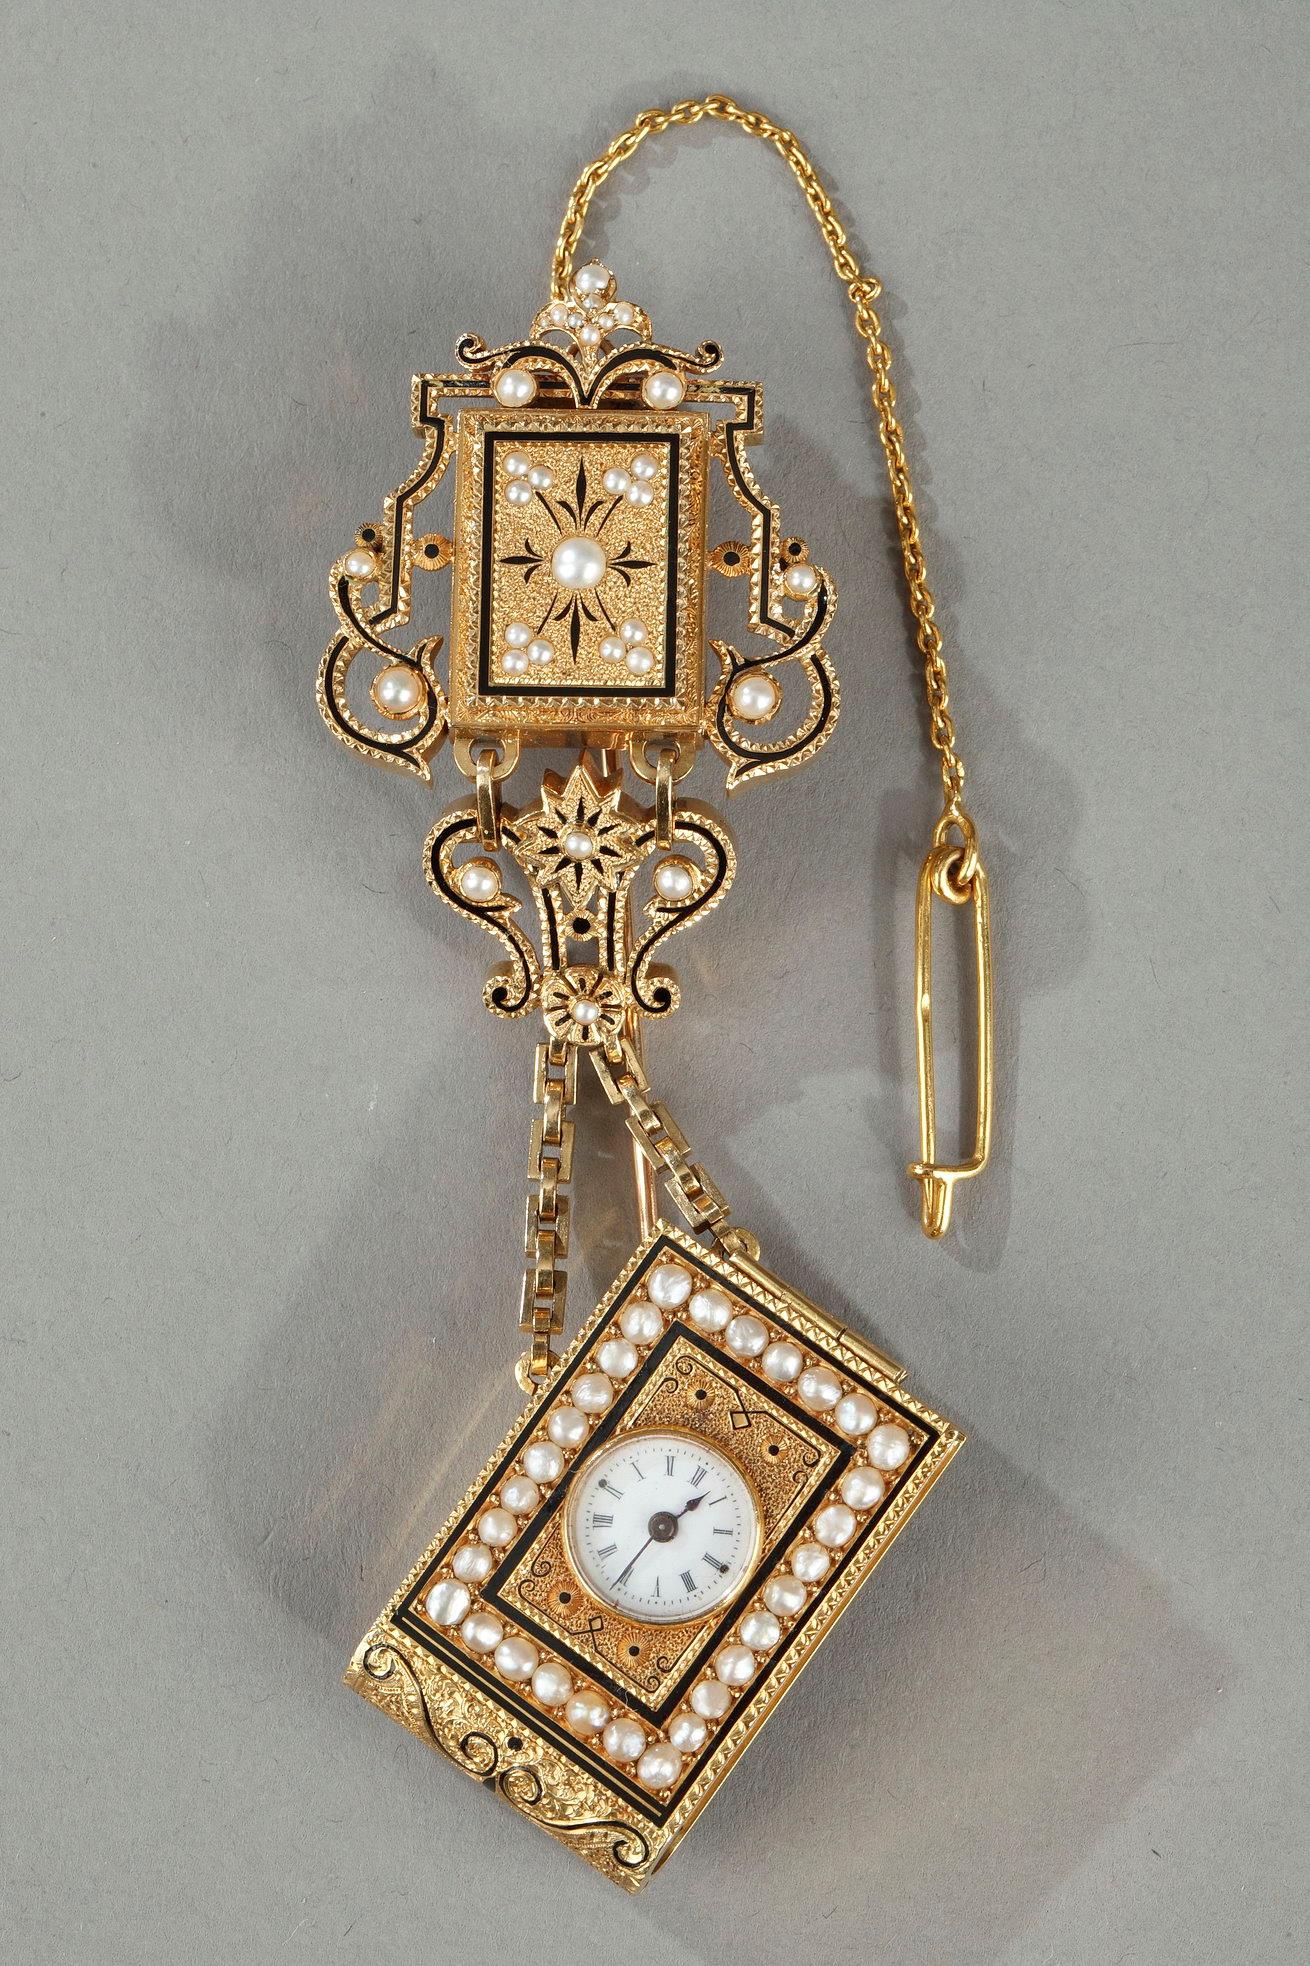 A 19th Century gold and enamel watch with associated chatelaine.